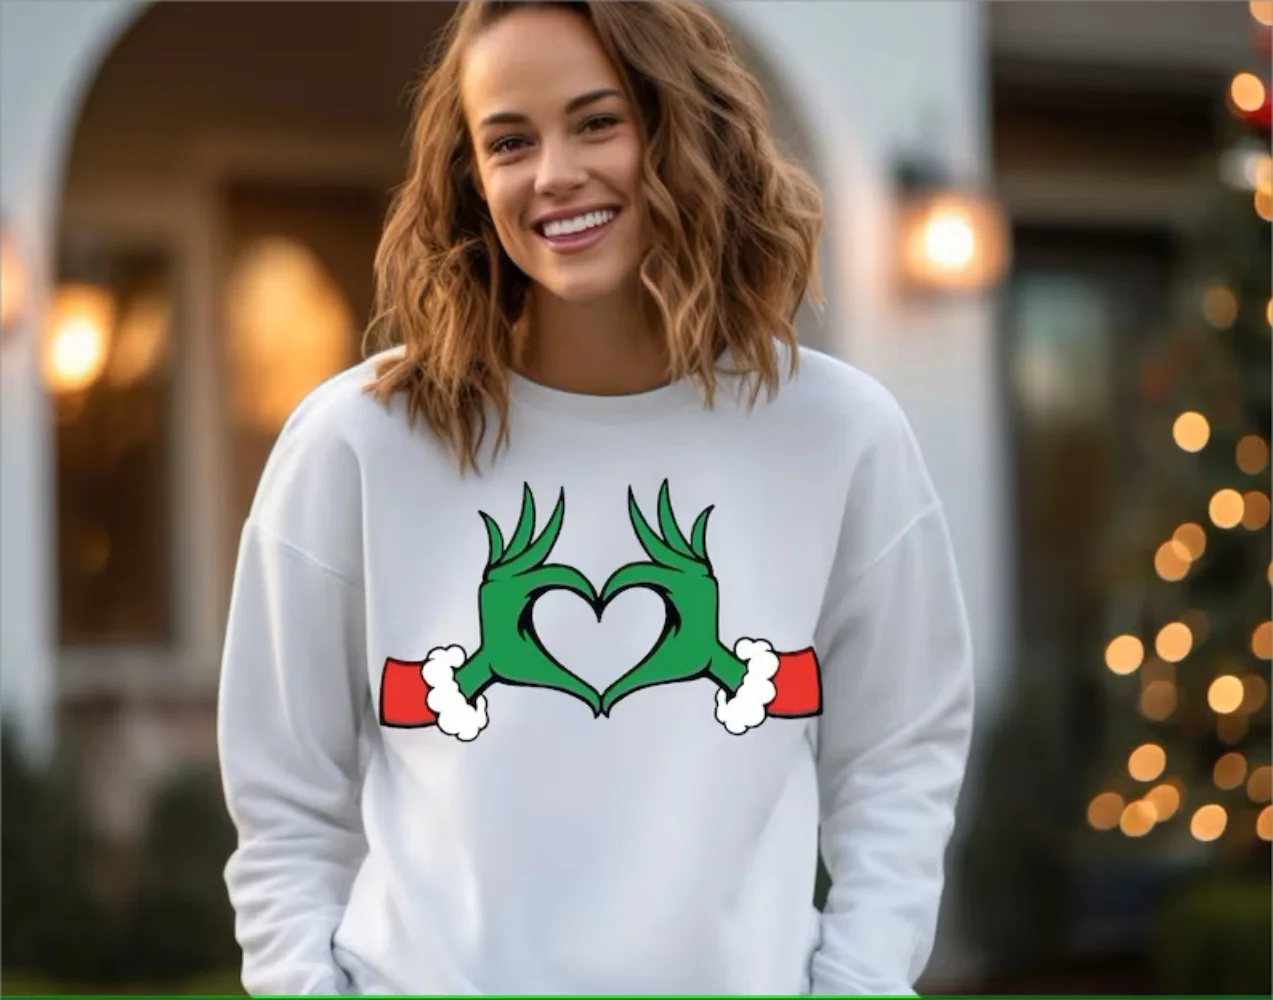 Trending Now Heart Hands Graphic Christmas Shirt Cute Funny Love Graphic Tees Matching Family Sweatshirt Xmas Holiday T-Shirt t shirts tees christmas sparkly glitter santa claus lantern t shirt tee fluorescent pink in pink size l m s xl